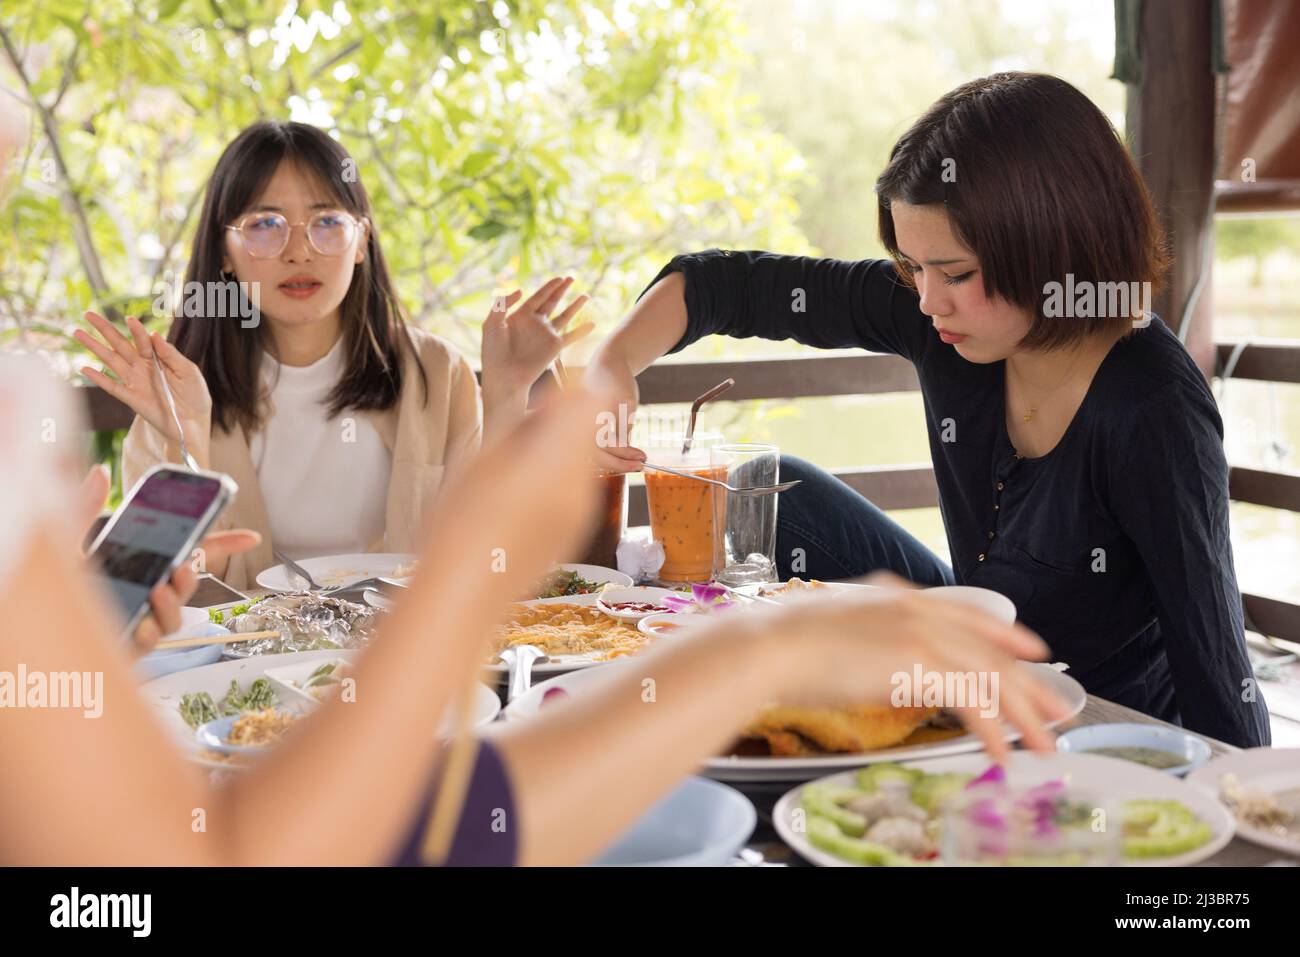 Female friends eating lunch outdoors Stock Photo